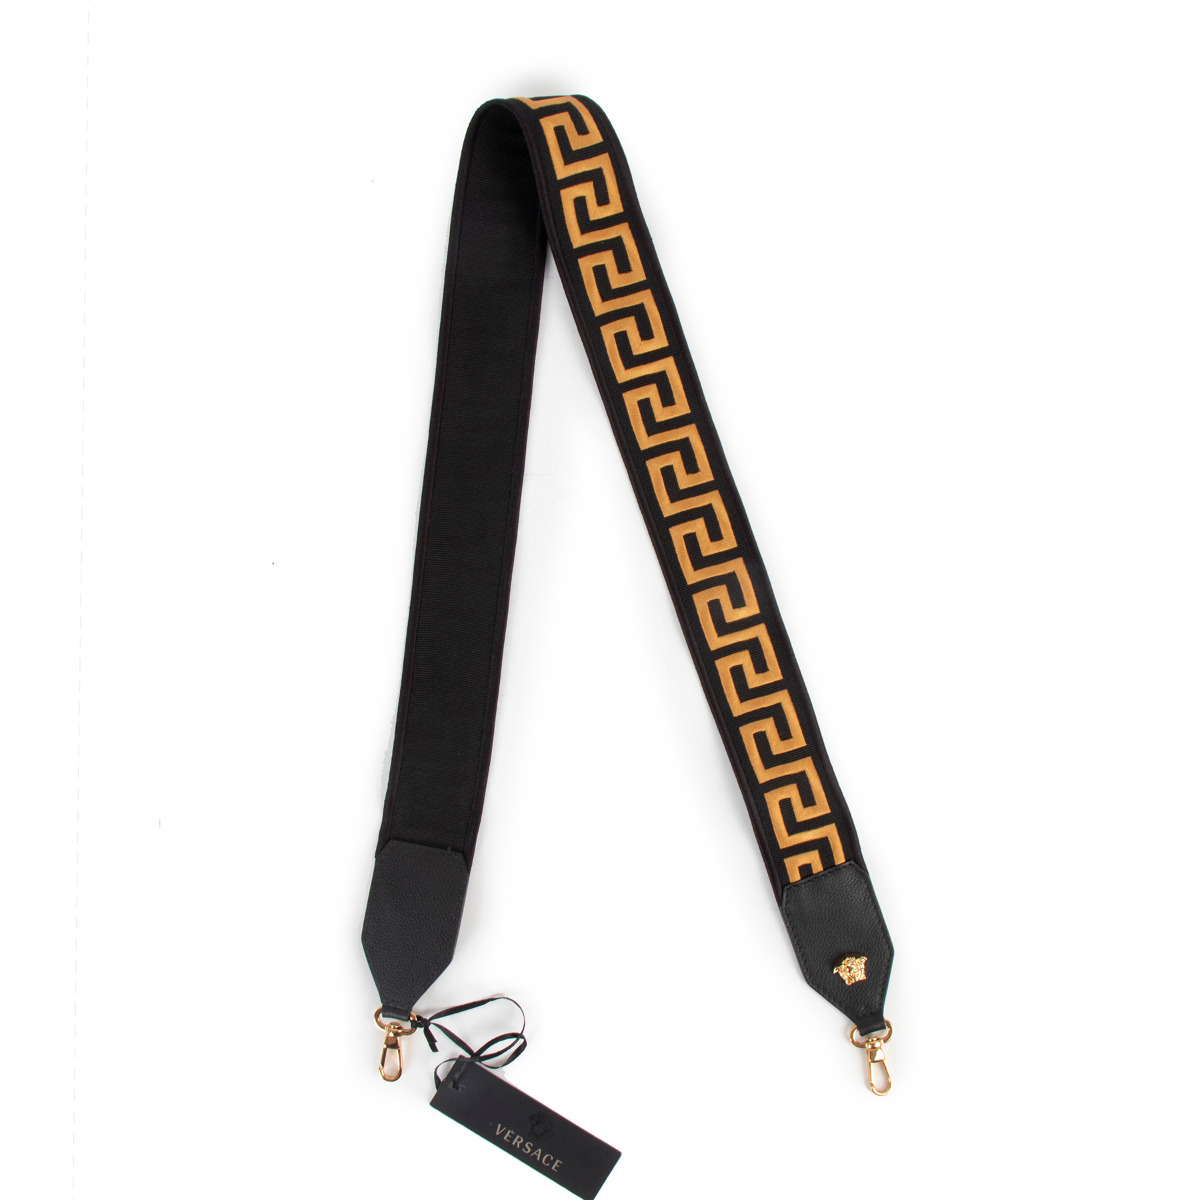 https://www.labellov.com/media/catalog/product/1/6/1618_versace_black_and_gold_leather_strap.jpg